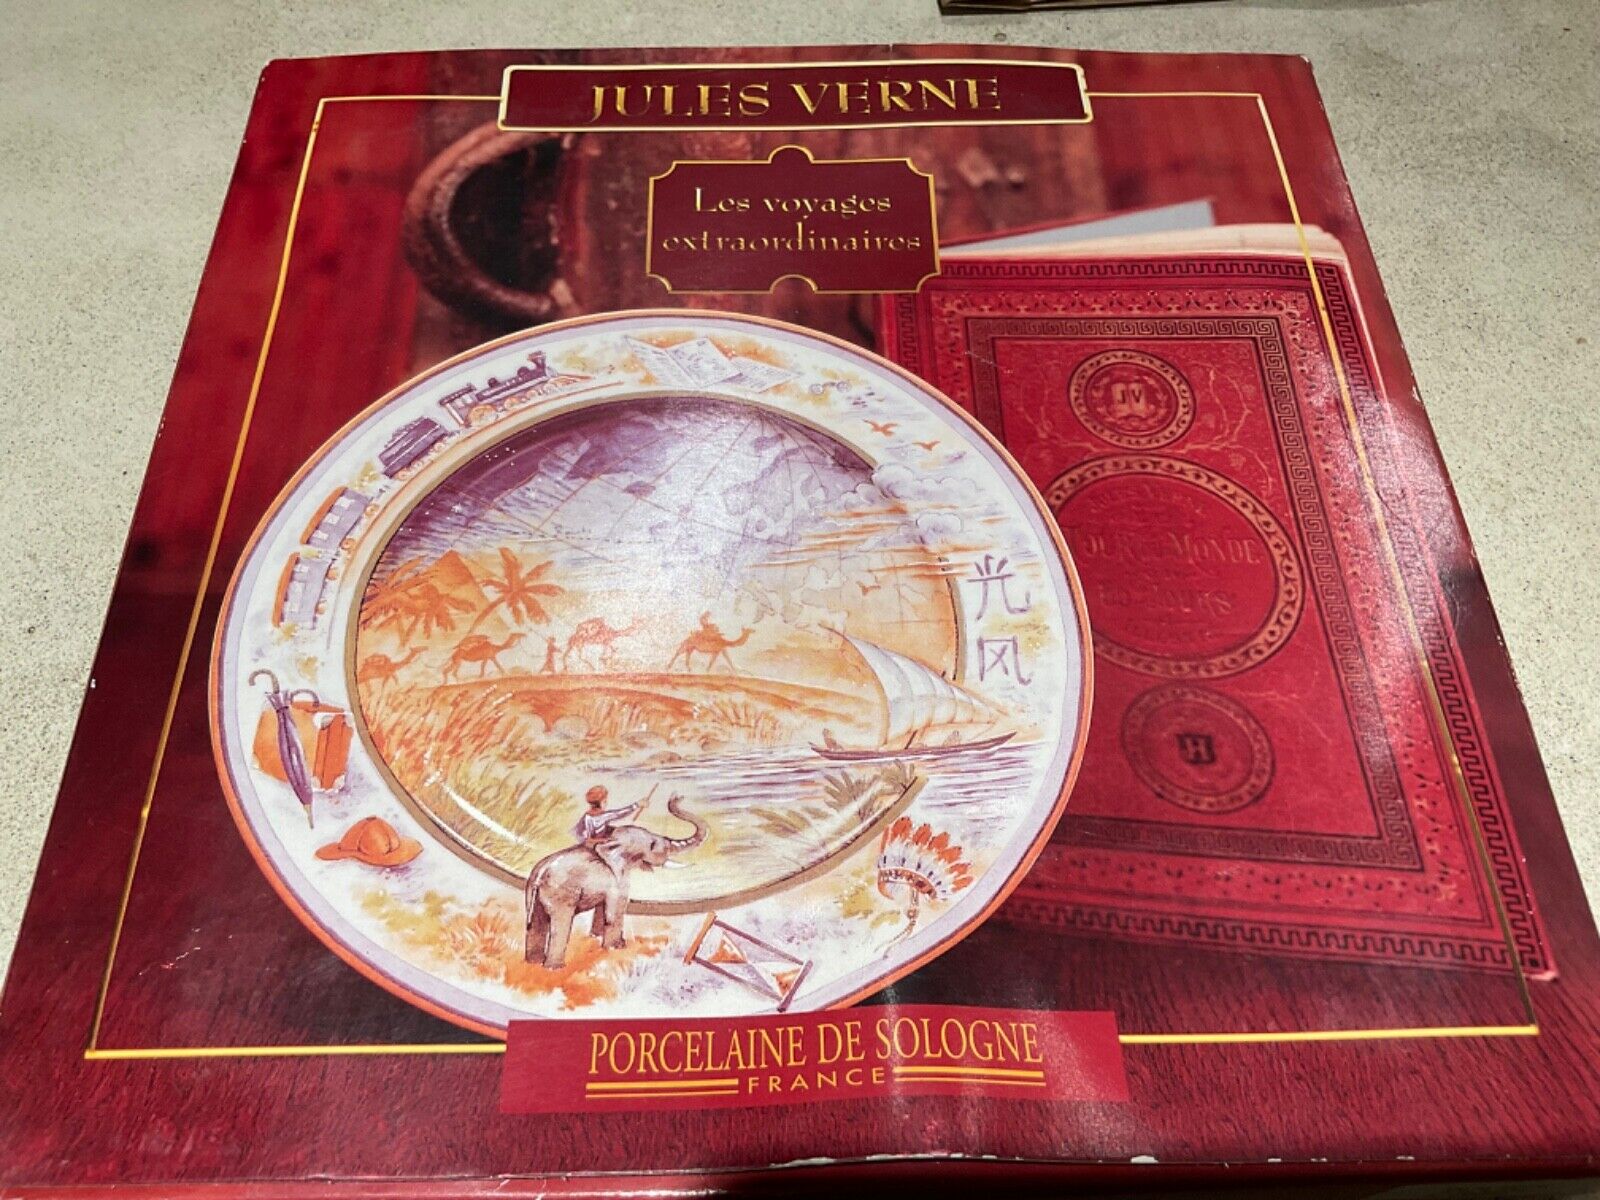 Fabulous Vintage Jules Verne Anniversary Plate: Rocket to the Moon - From France